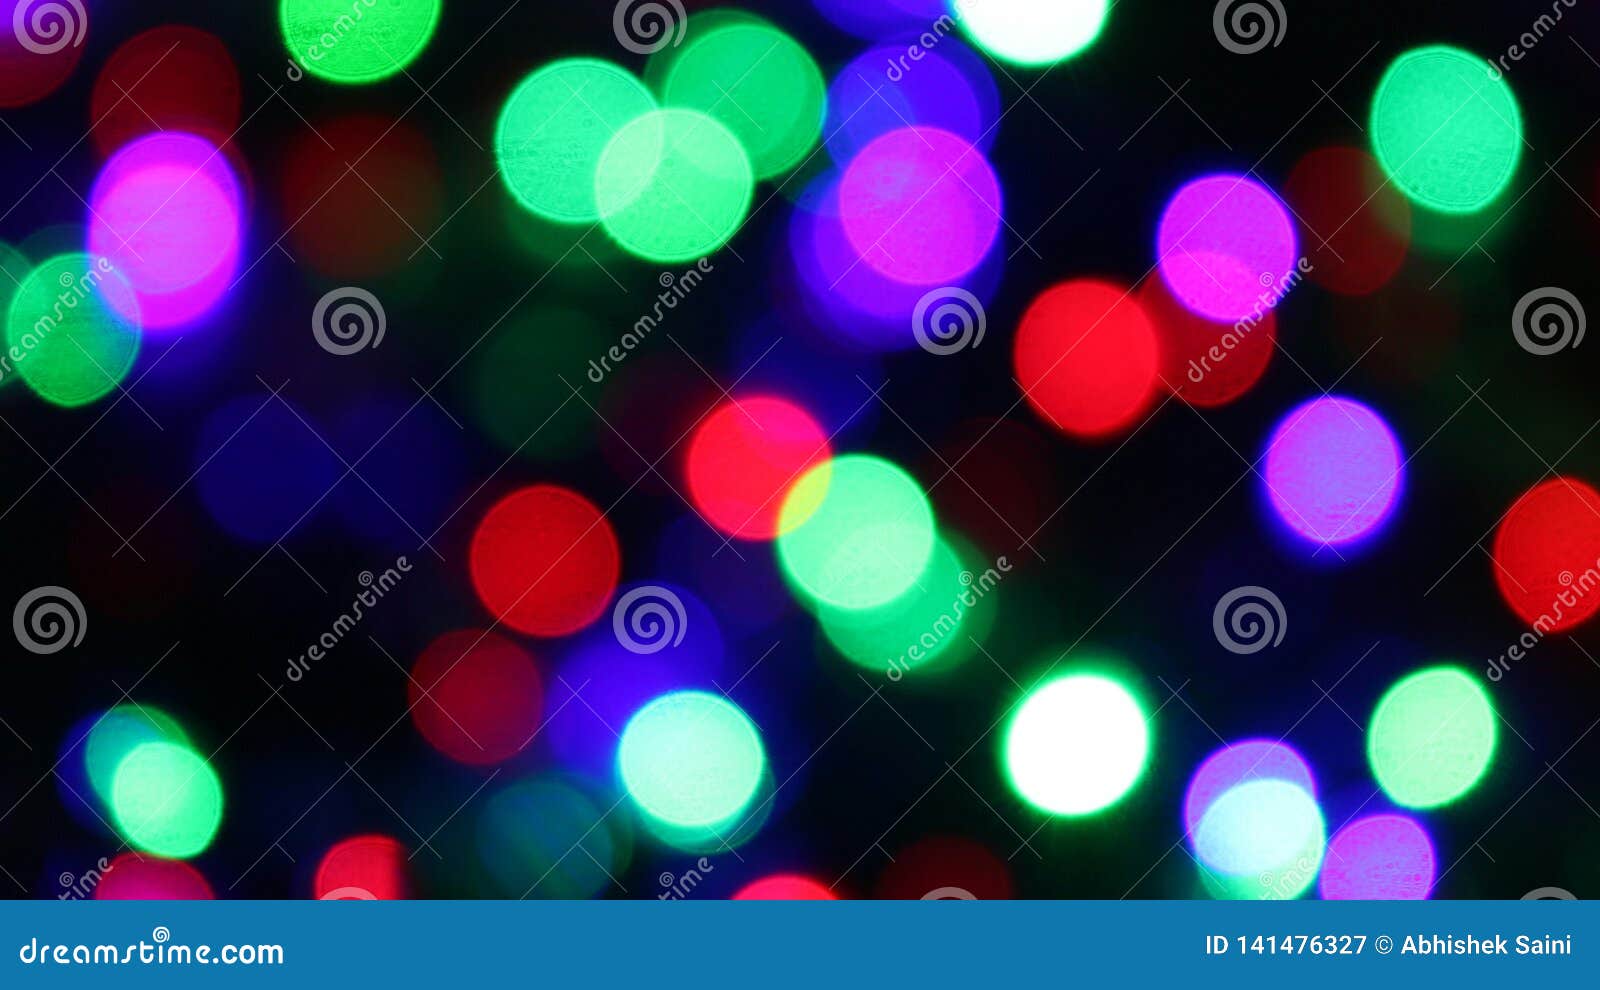 Abstract Light Bokeh Background, Diwali Lights, Blurry Lights, Glitter  Sparkle Stock Image - Image of bright, abstract: 141476327